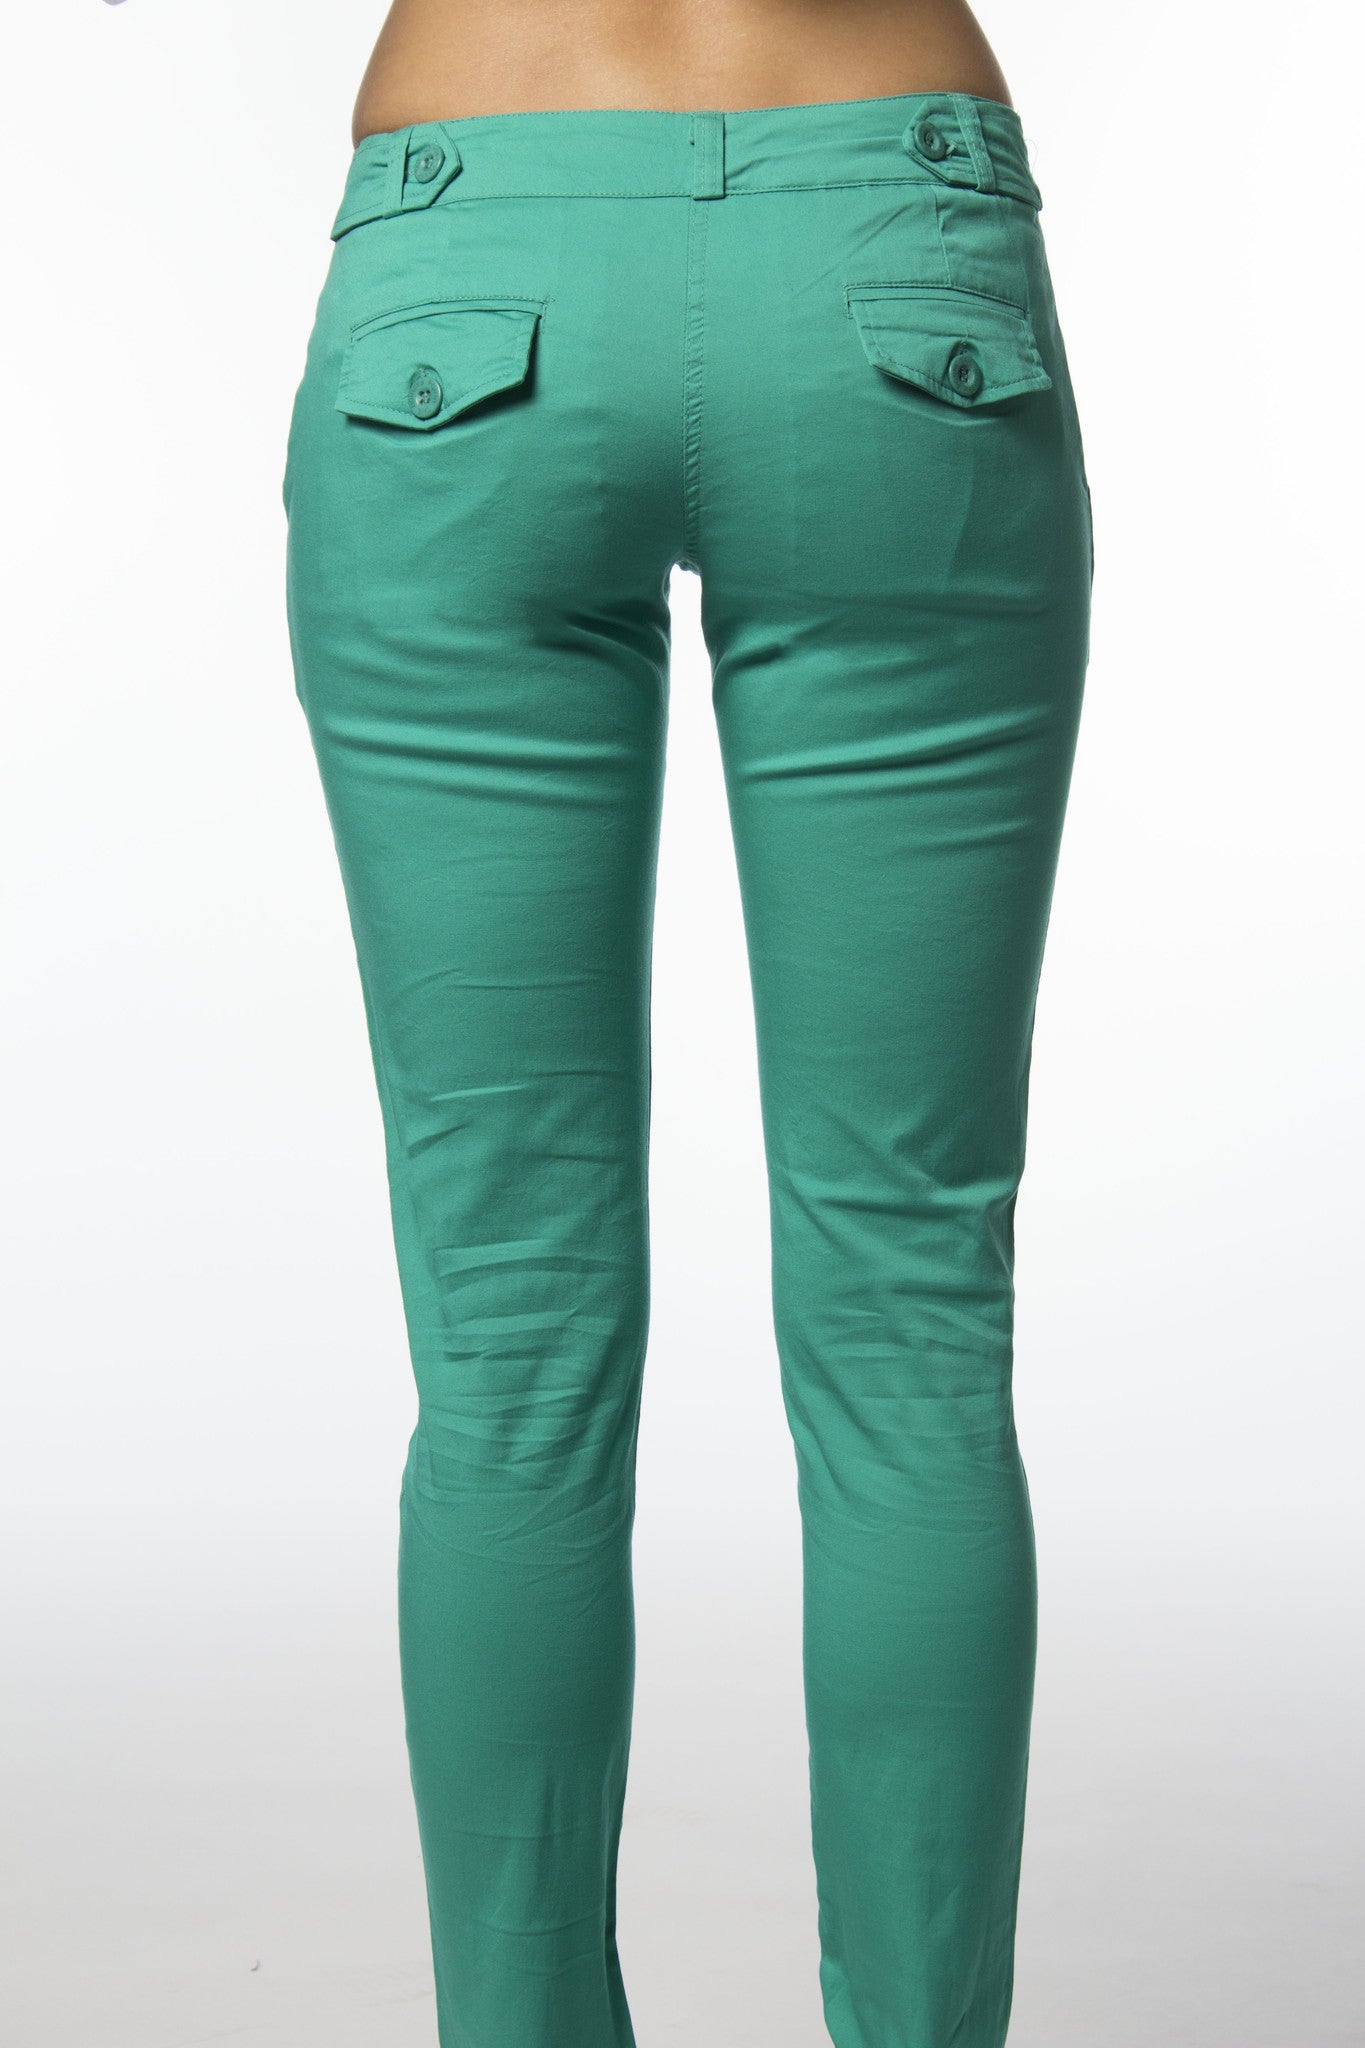 green cotton pant with back flap pockets